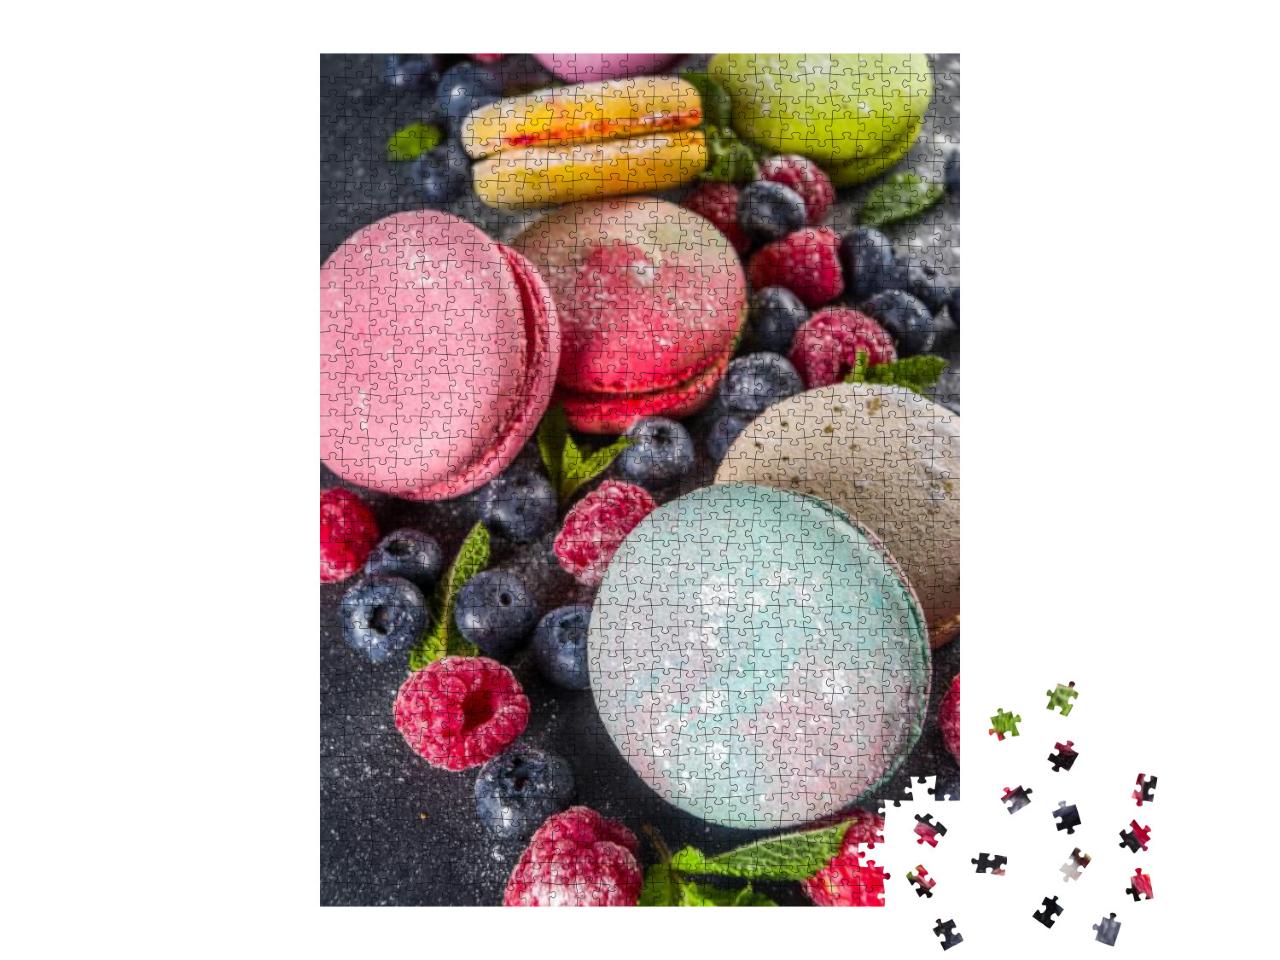 Colorful French Macaron Dessert. Set of Various Different... Jigsaw Puzzle with 1000 pieces